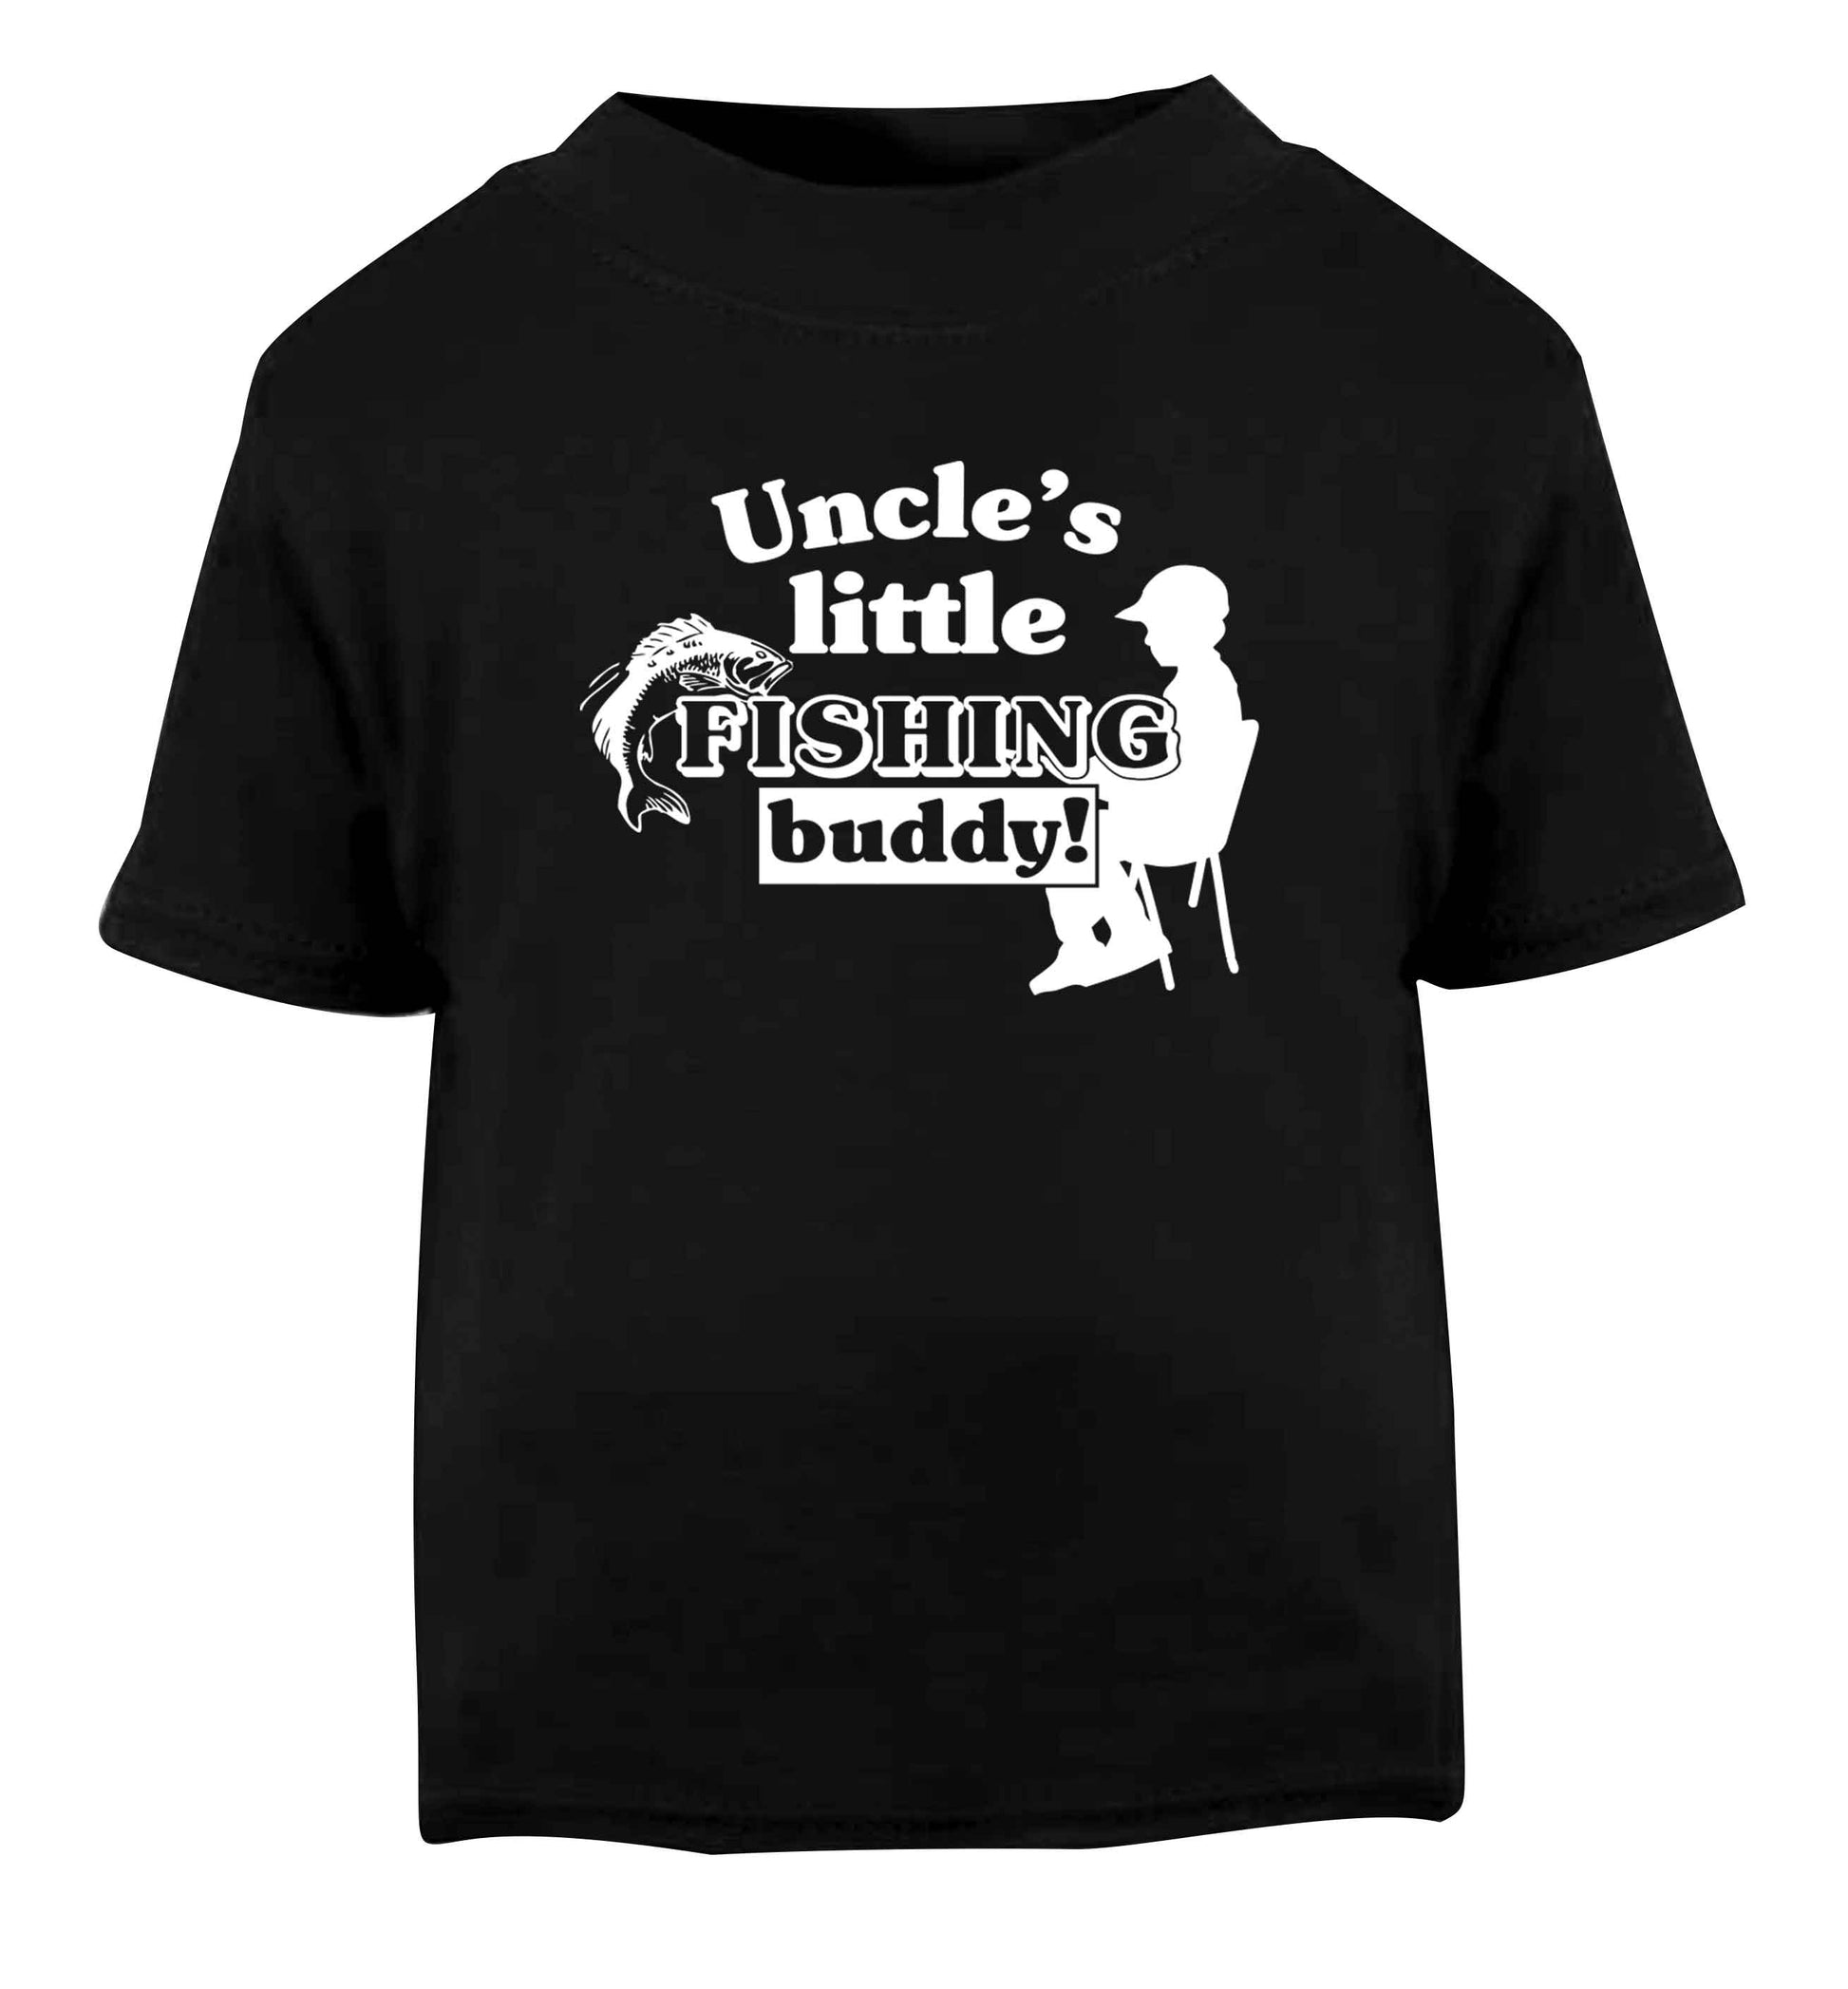 Uncle's little fishing buddy Black Baby Toddler Tshirt 2 years